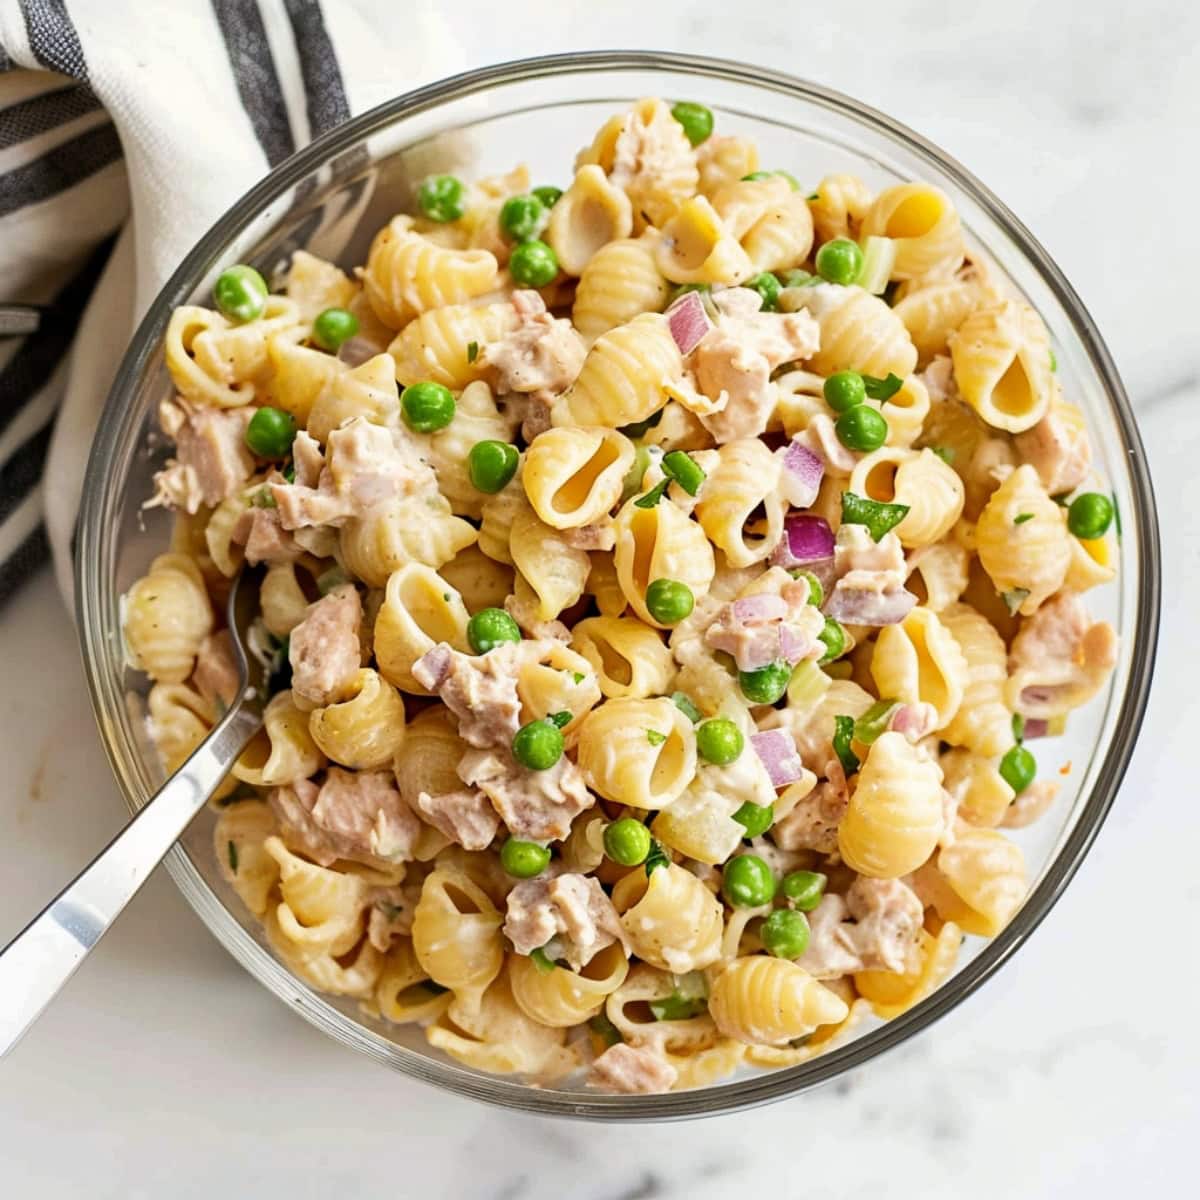 Homemade salad featuring pasta shells, tuna, green peas, red onions in a glass bowl.